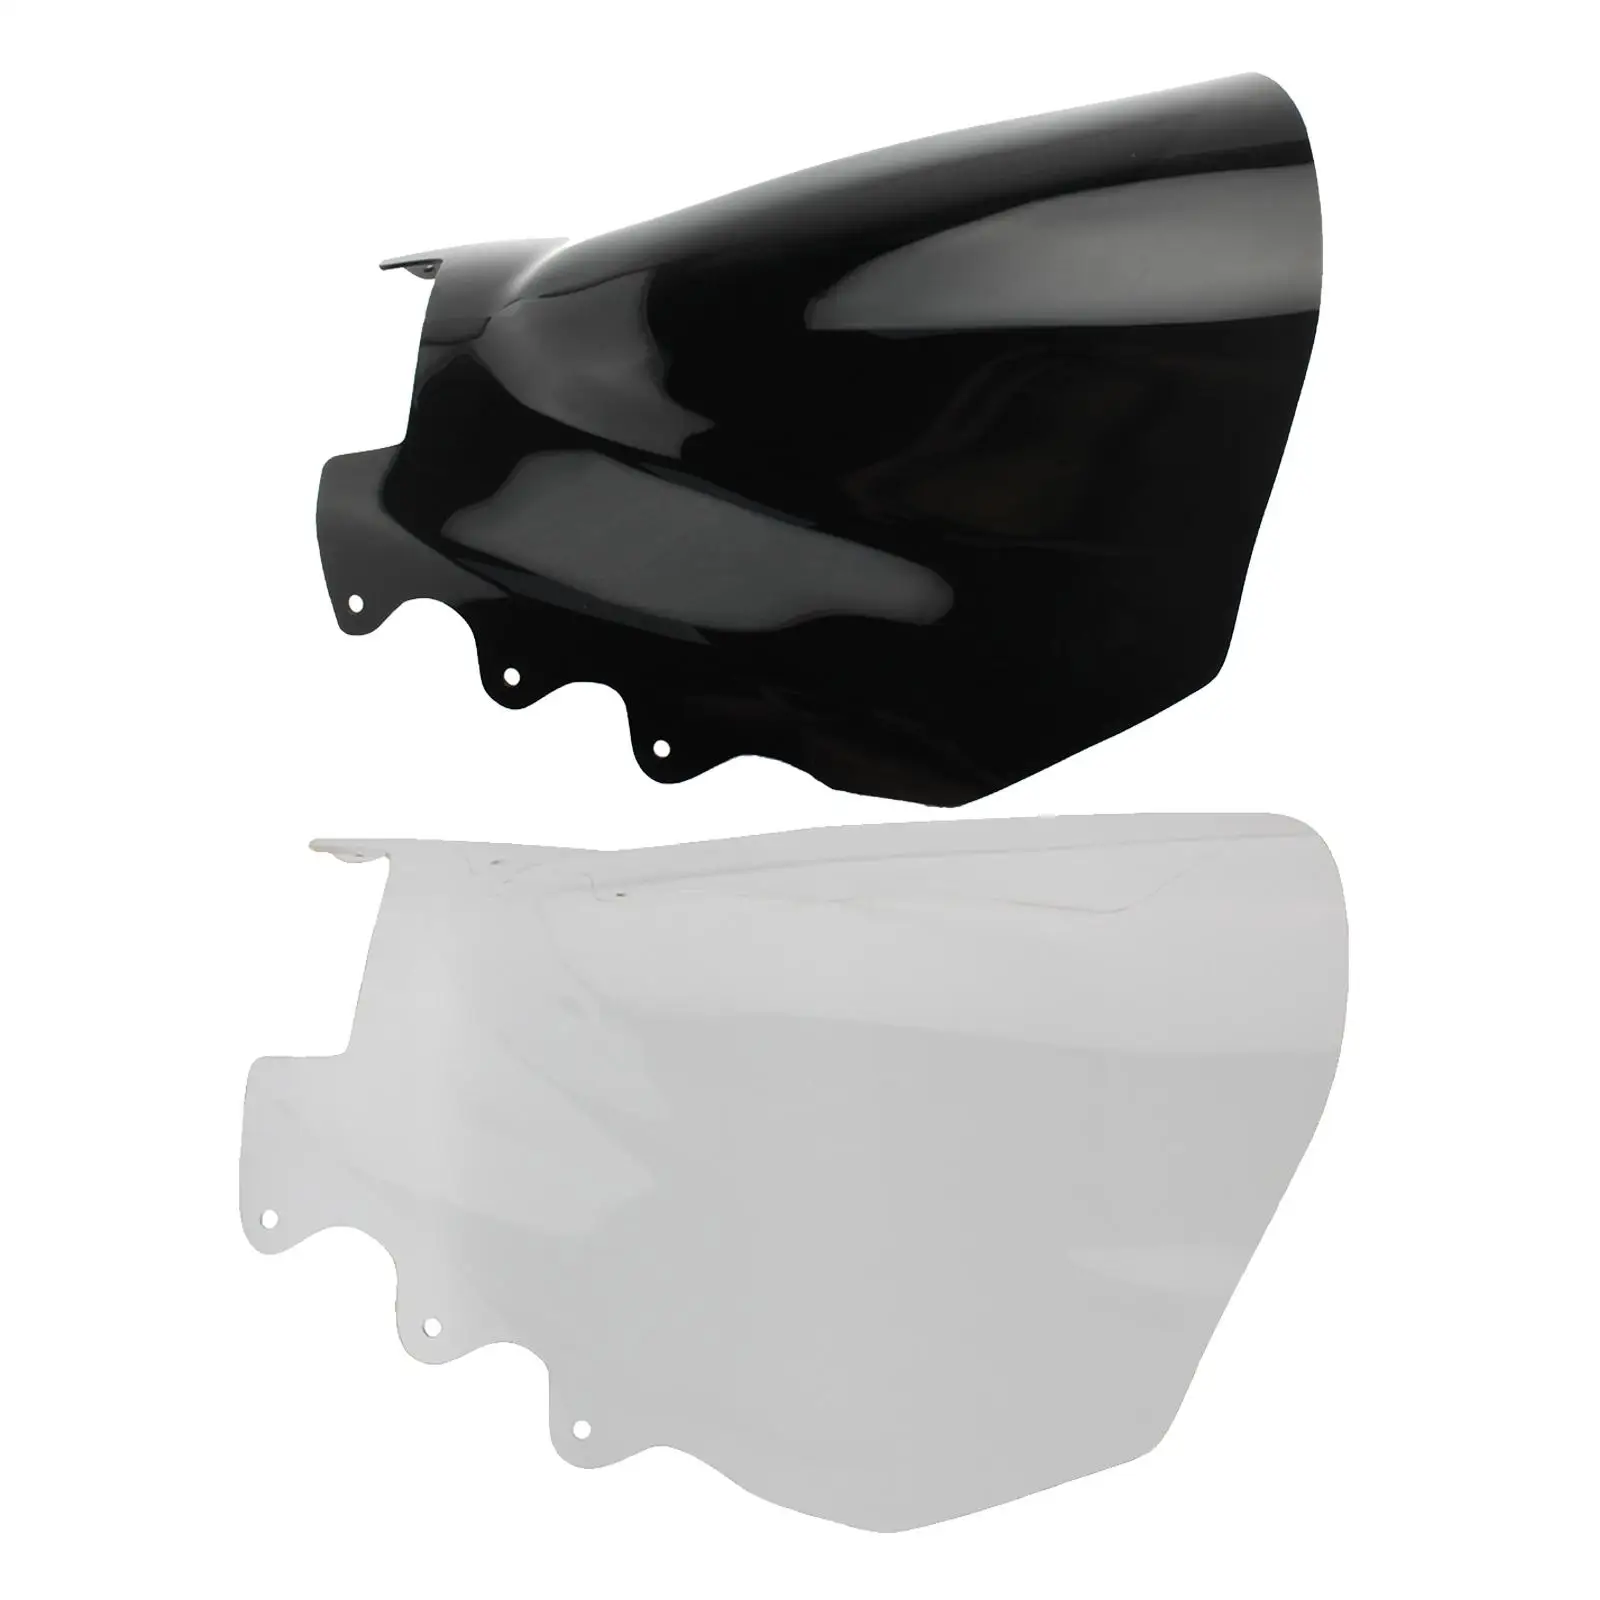 Acrylic Motorcycle Windshield Windscreen Attractive Durable Exterior Accessories Parts Fits for Honda 400/600CC 2001-2008